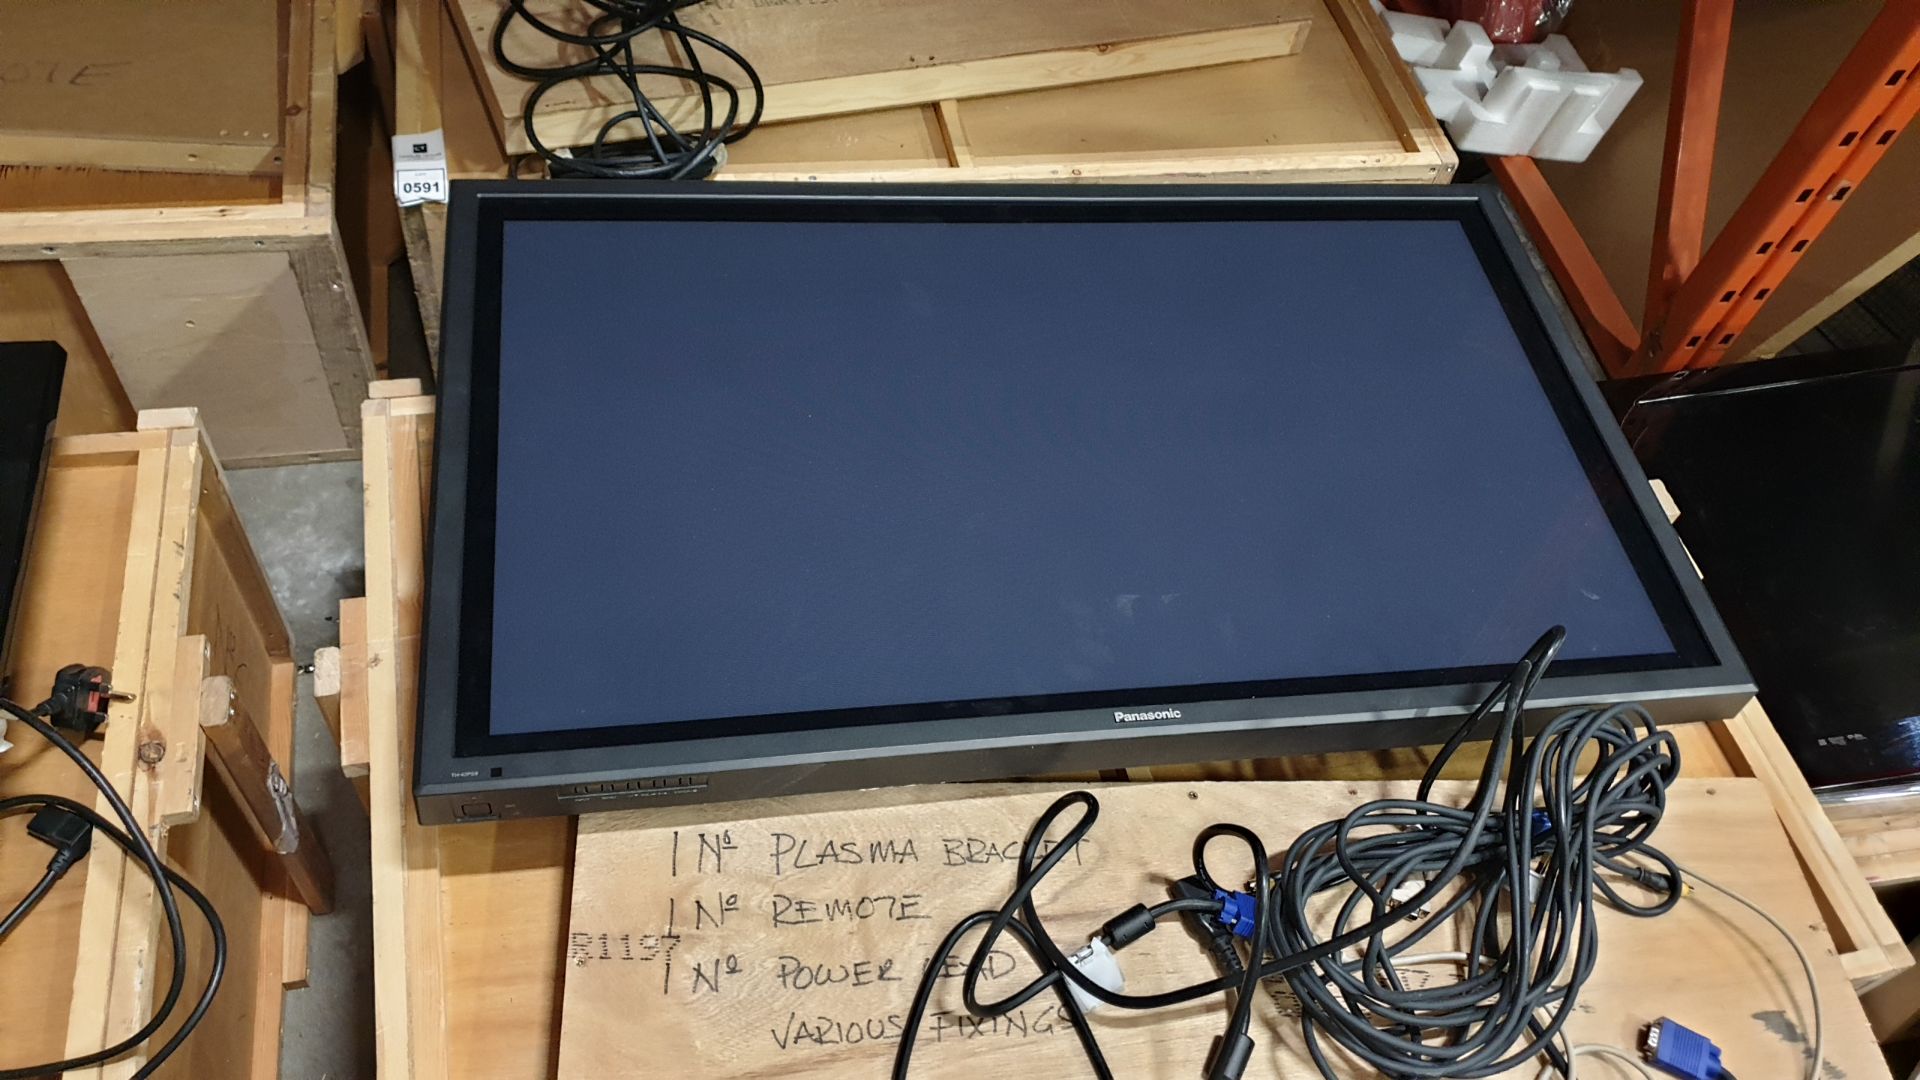 1 X PANASONIC TV MODEL NUMBER - TH-42PS9EK INCLUDES BRACKET, REMOTE AND POWER LEADS